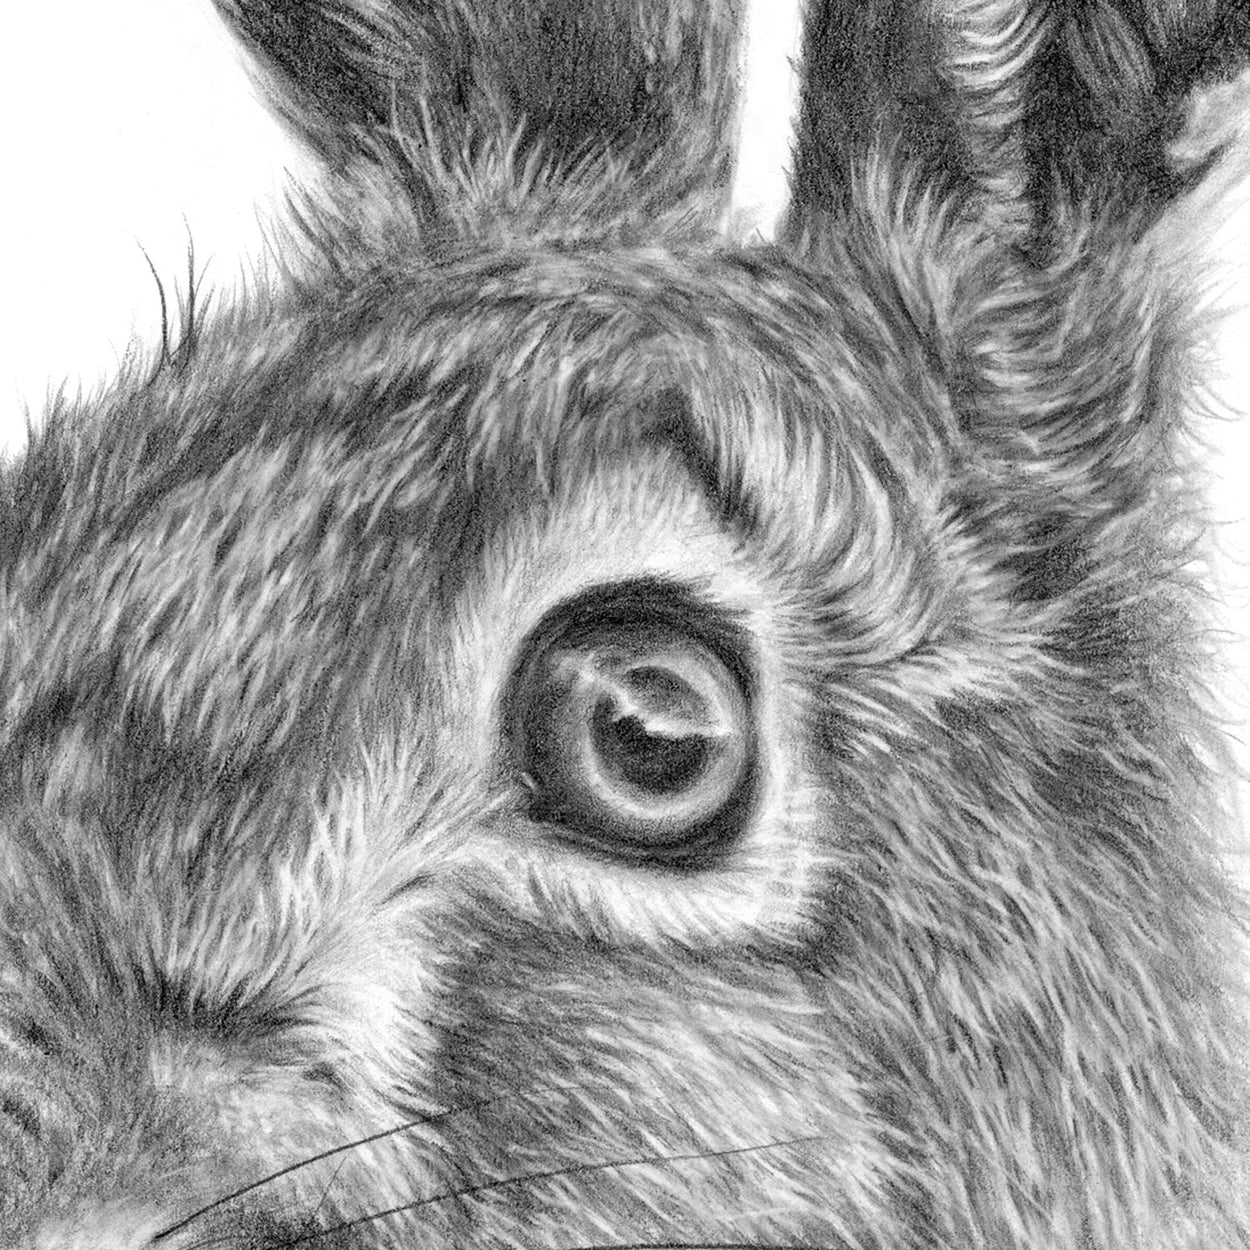 Hare Drawing Eye Close-up - The Thriving Wild